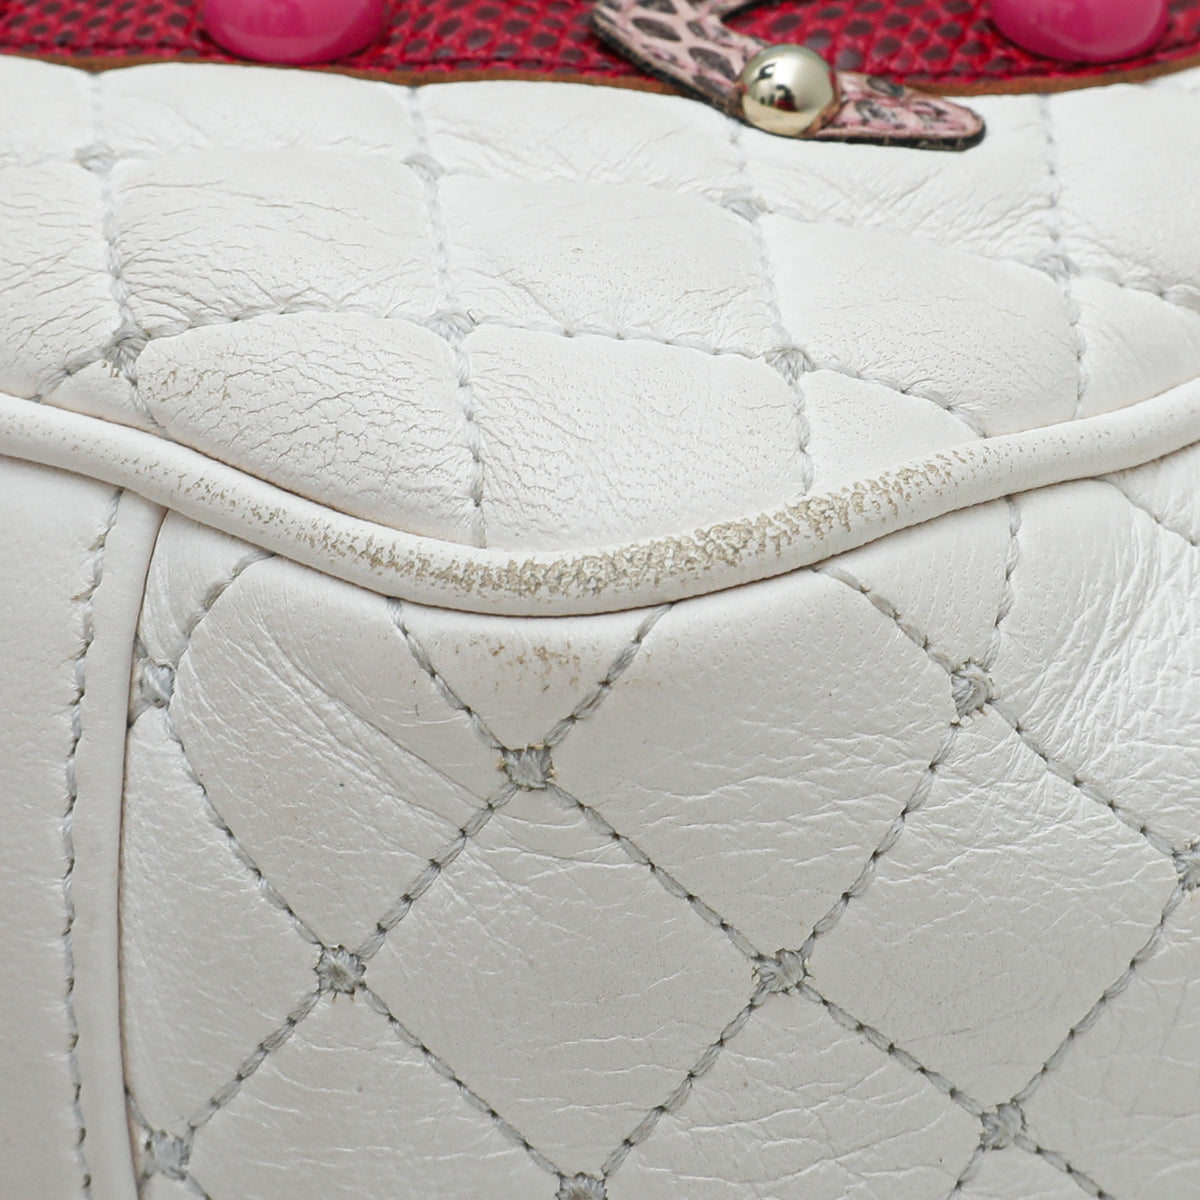 Dolce & Gabbana White Lucia Quilted Studs Embellished Bag